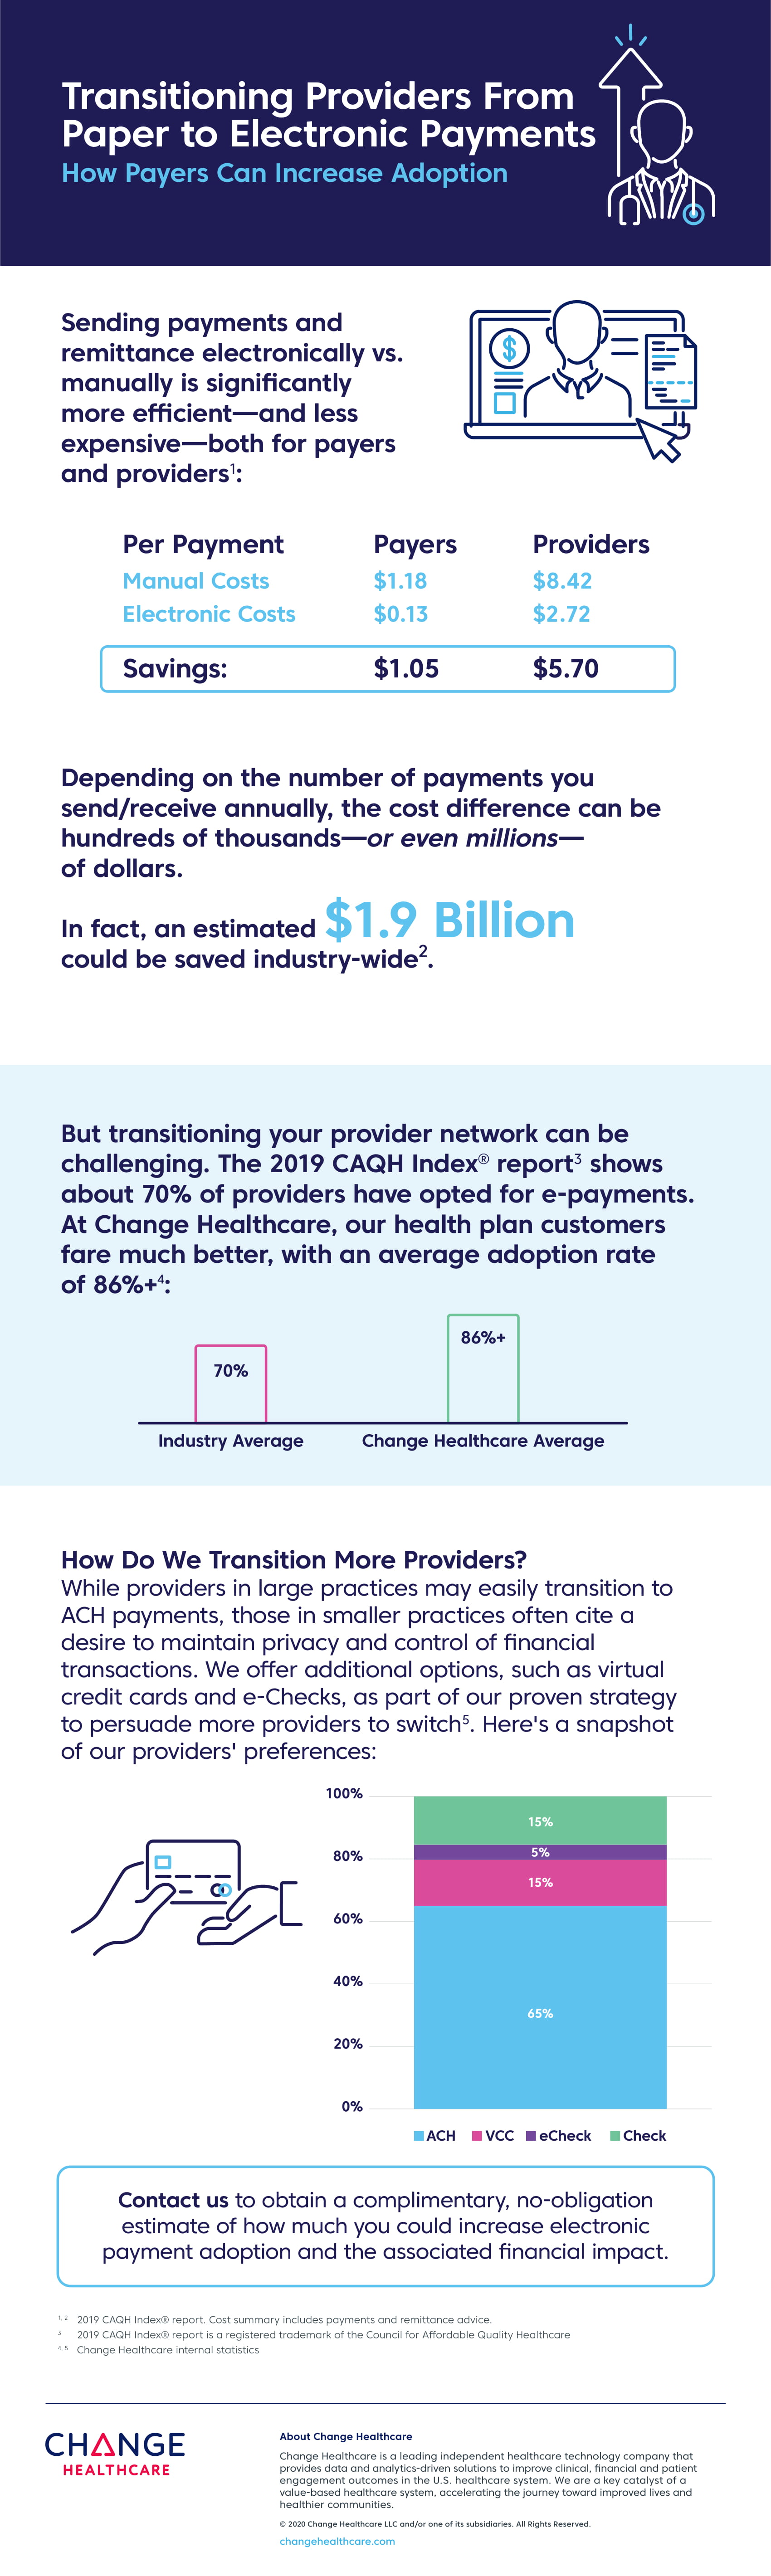 Transitioning Providers Infographic